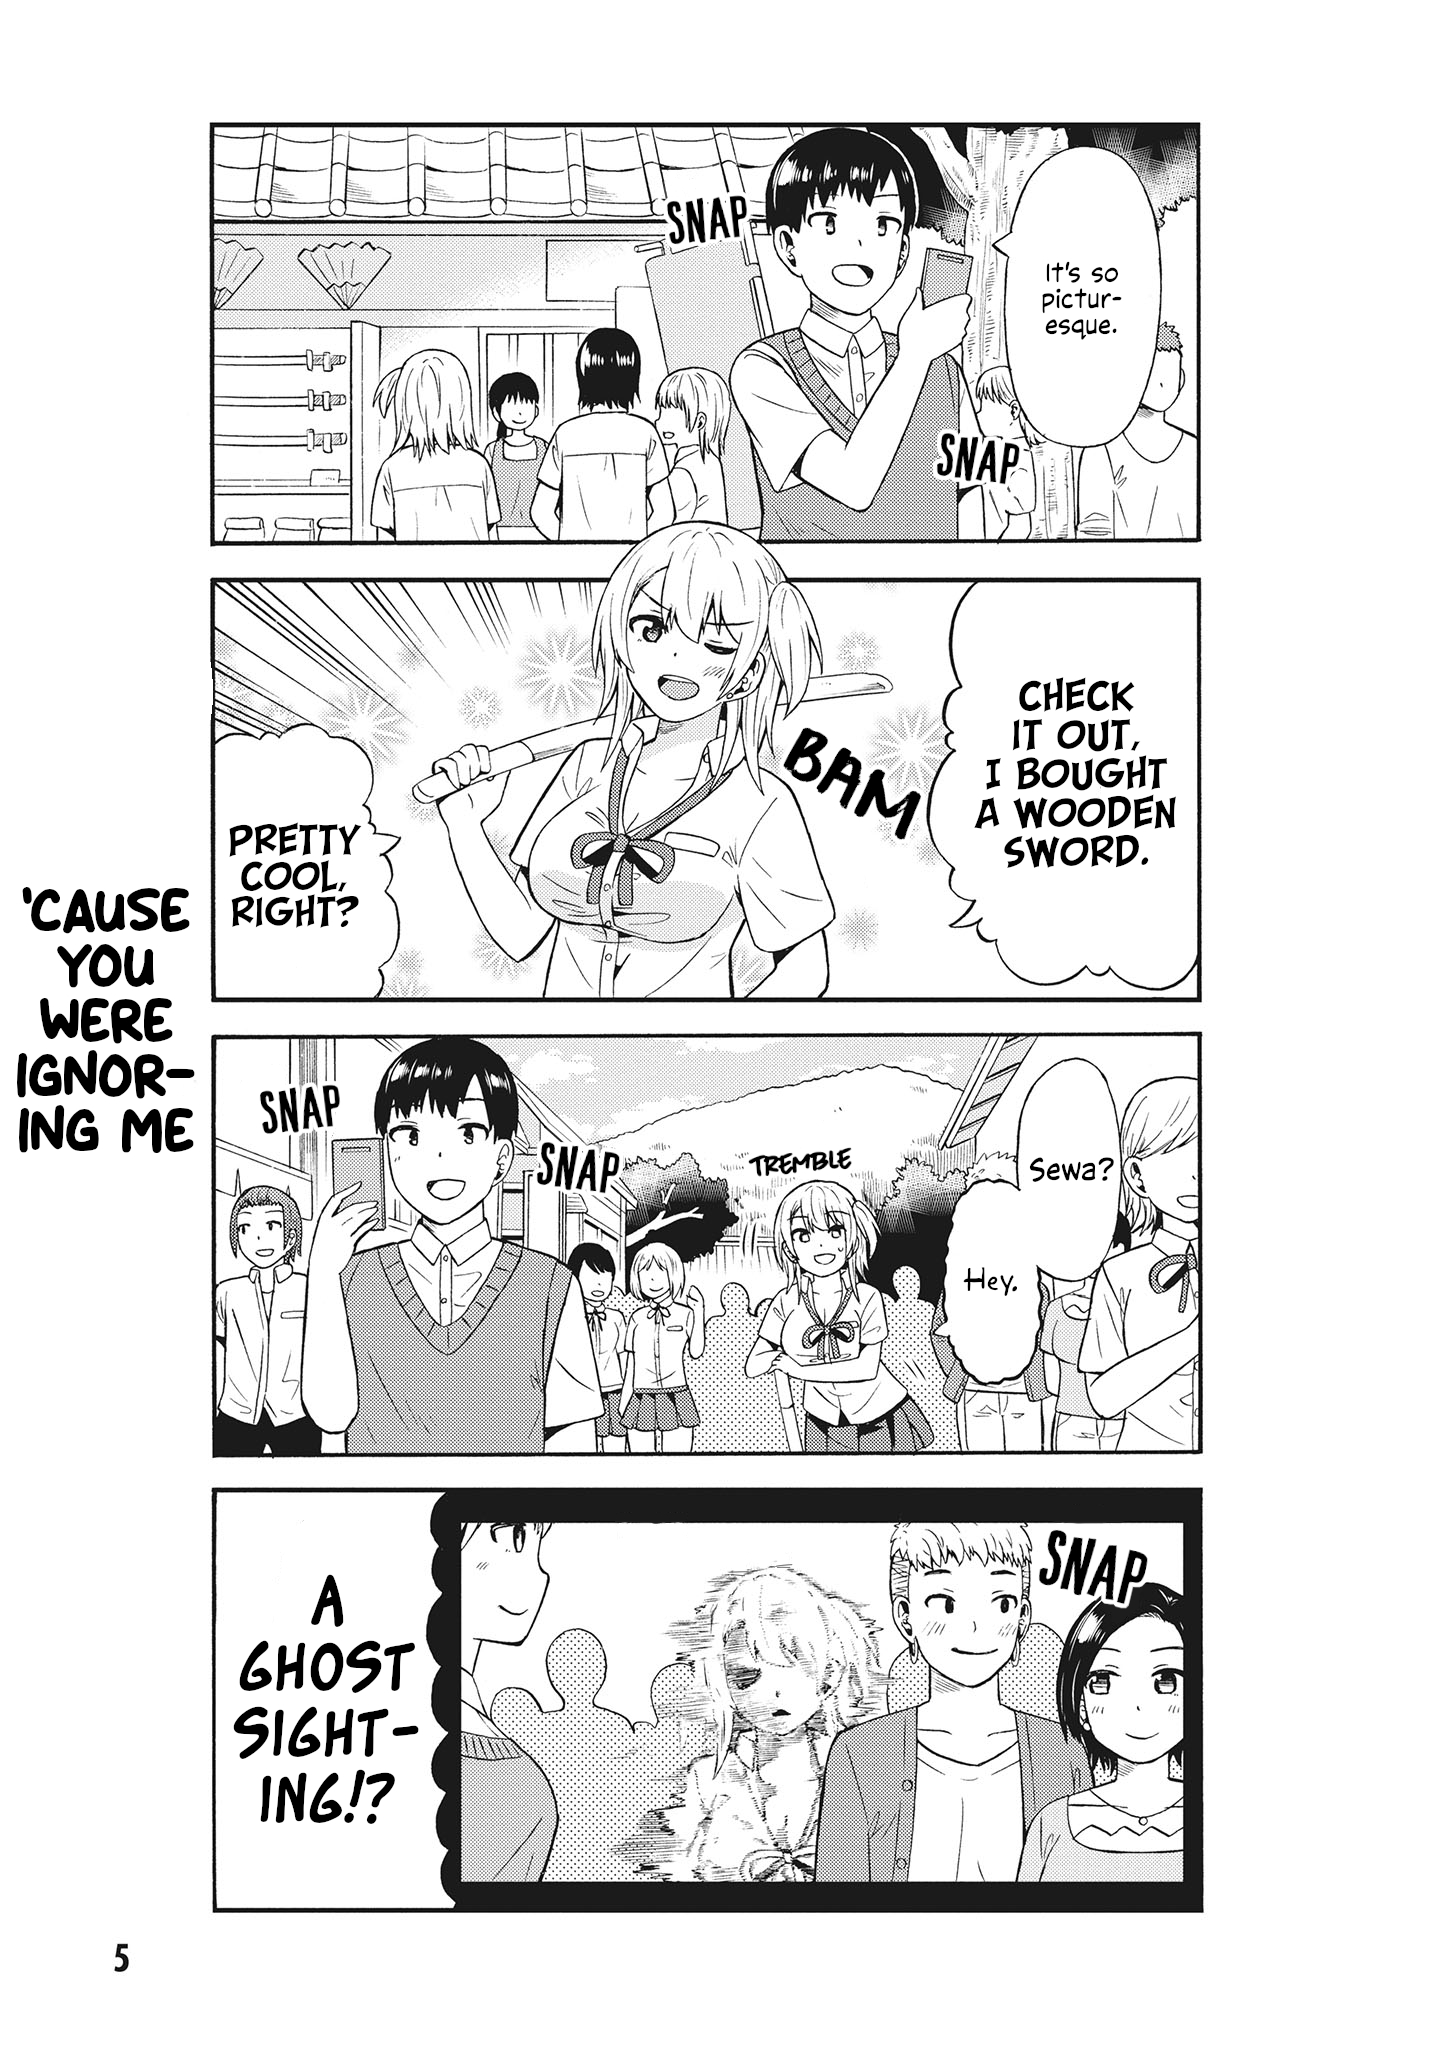 Usami-San Ha Kamawaretai! Vol.4 Chapter 51: Let's Fully Enjoy Our School Trip! (Part 1) - Picture 3